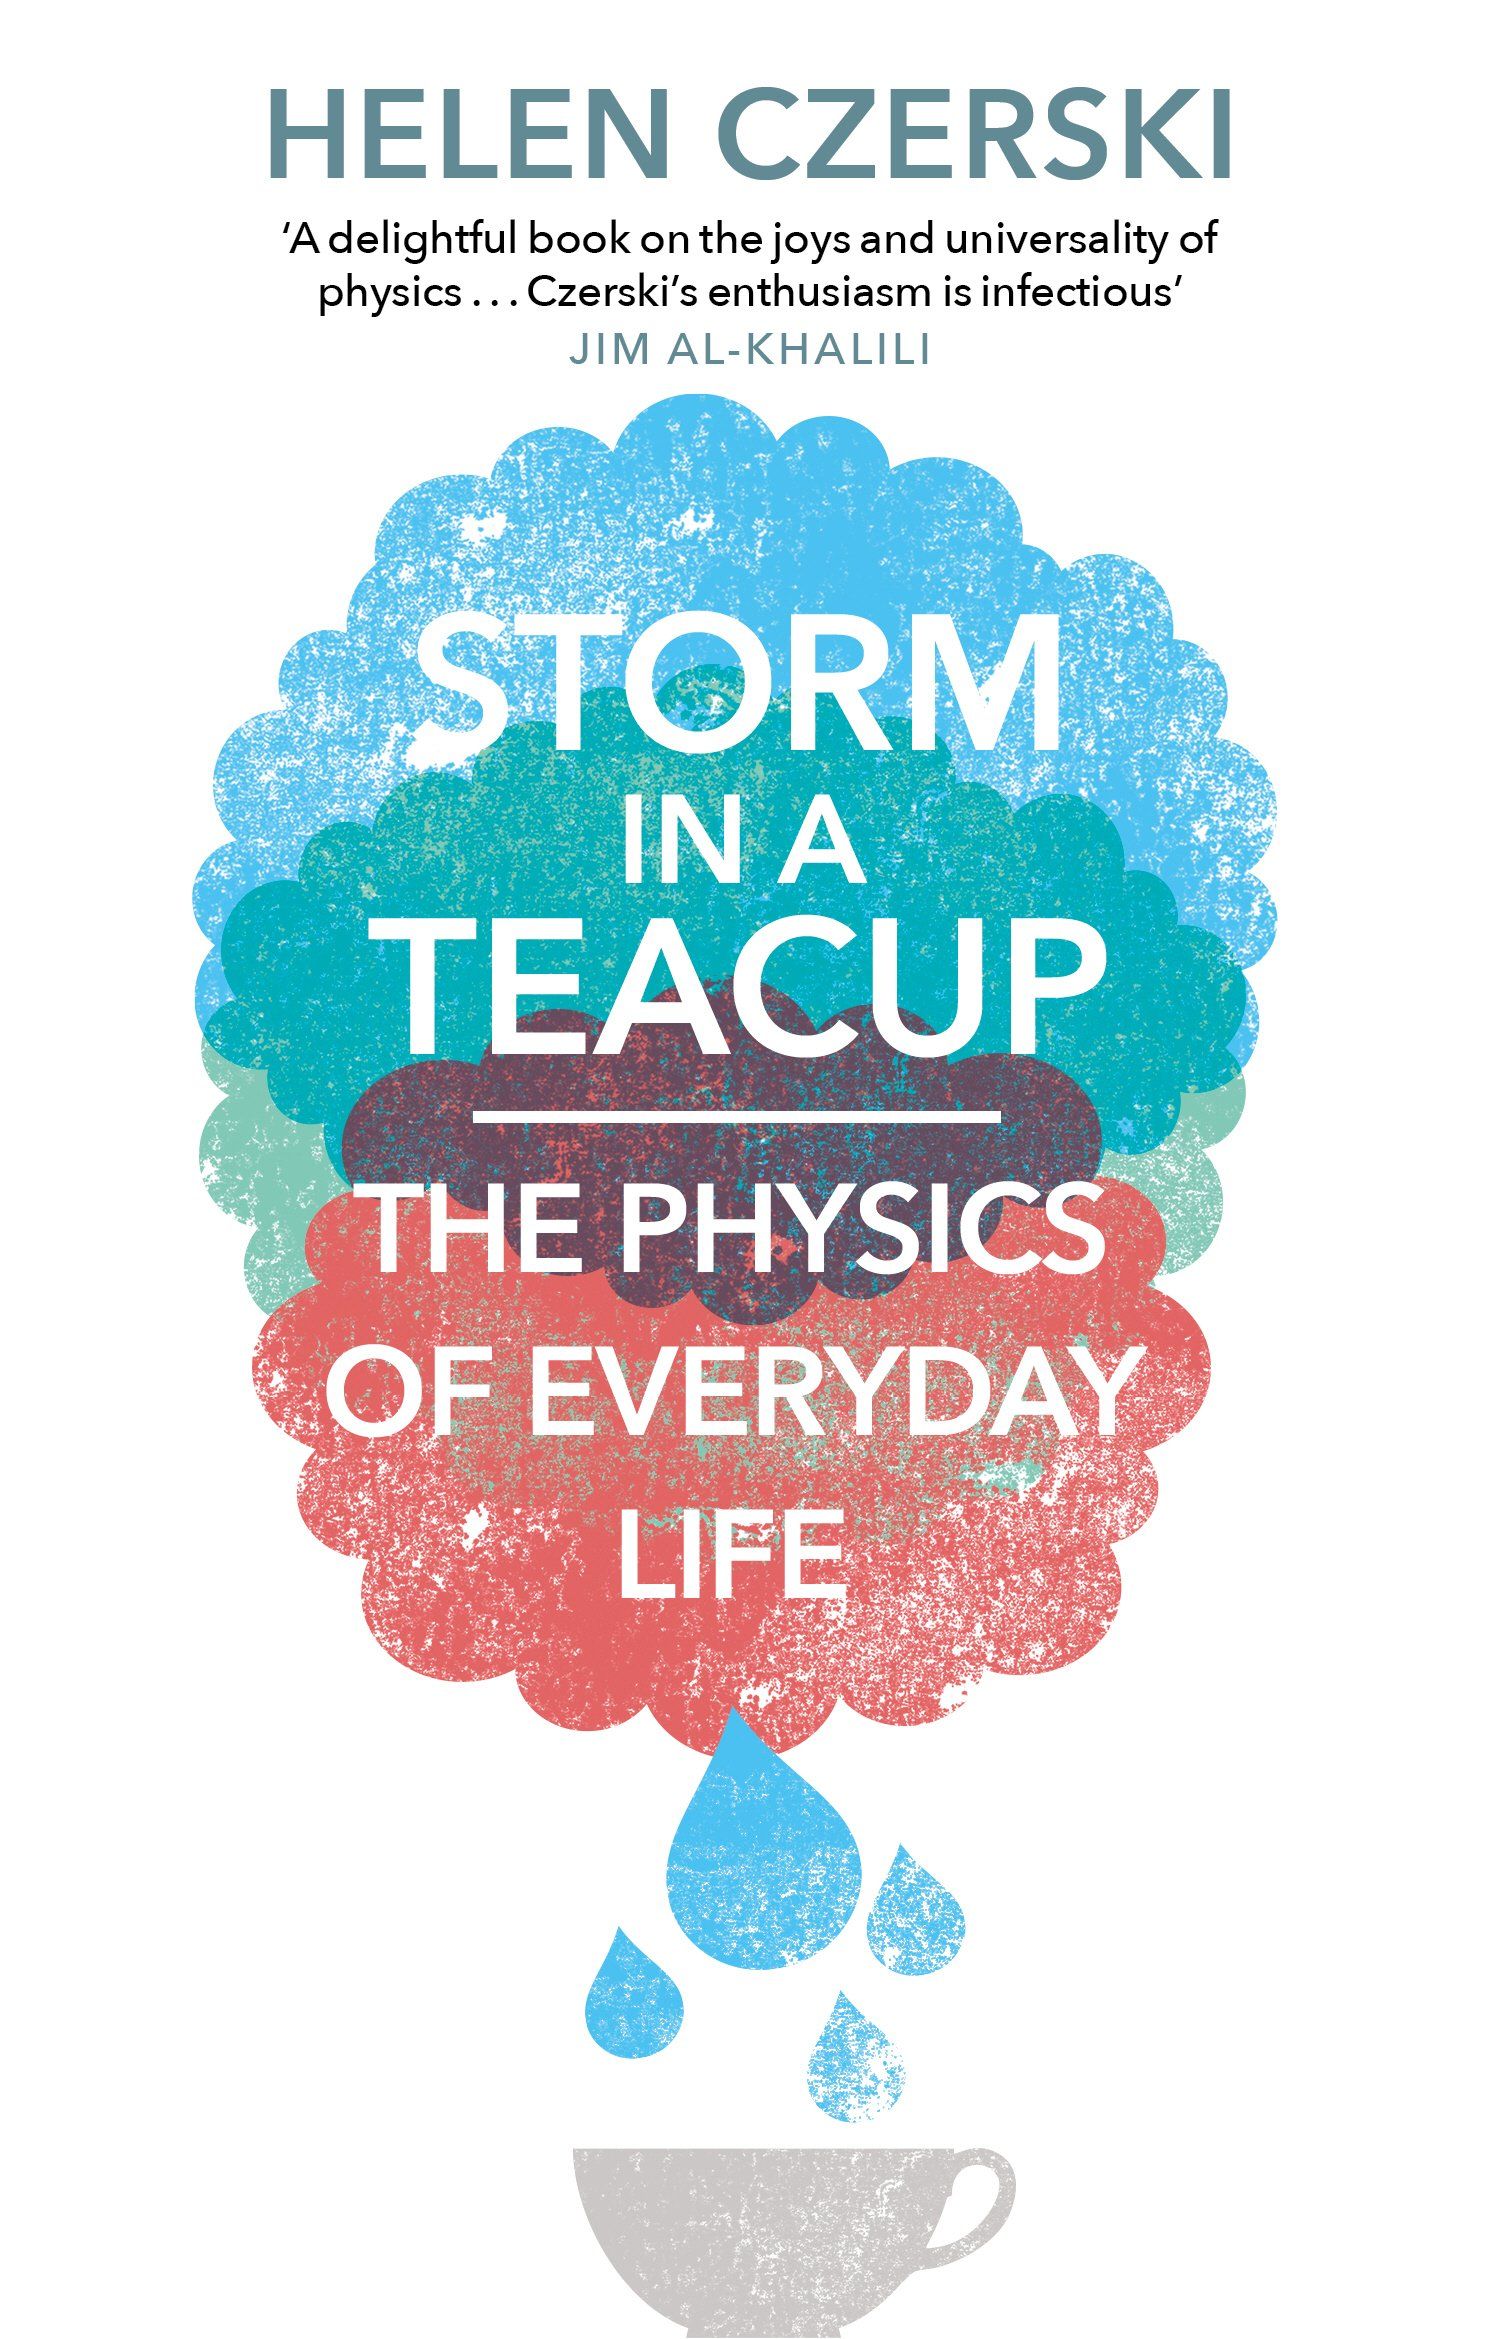 Cover of Storm in a Teacup by Helen Czerski